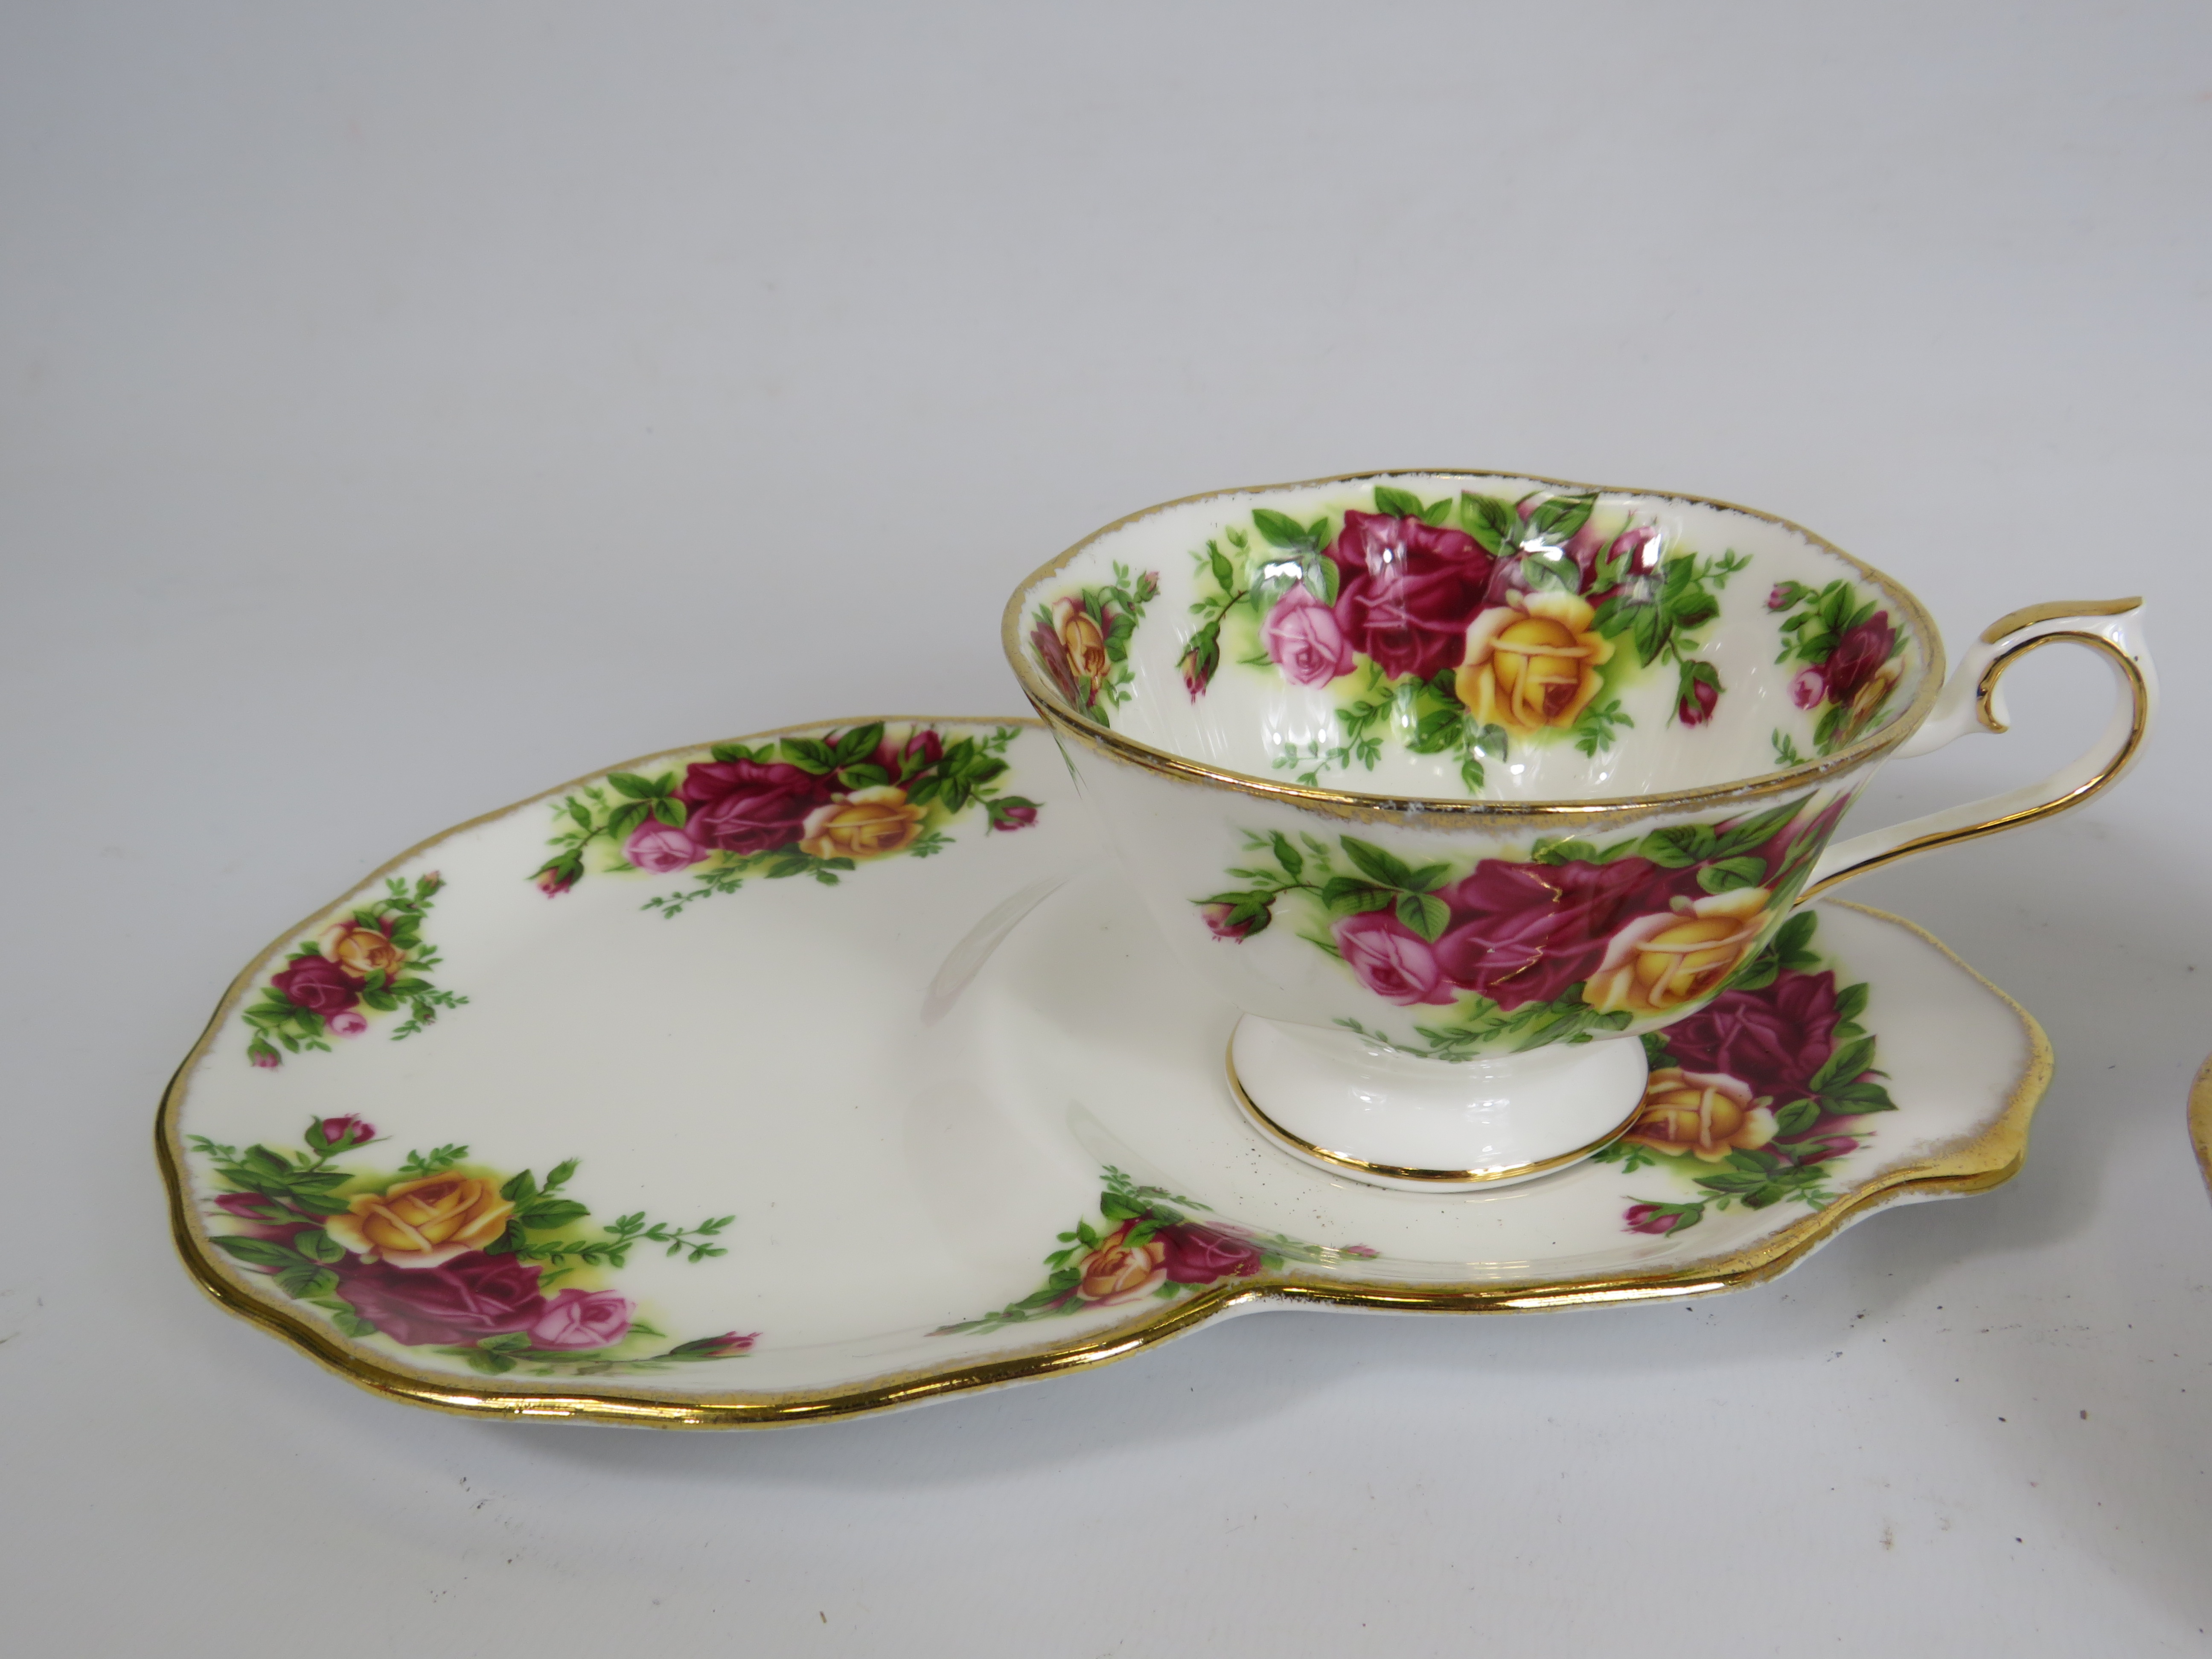 2 Royal Albert old country roses tennis sets and a Peach damask cup and saucer. - Image 2 of 4